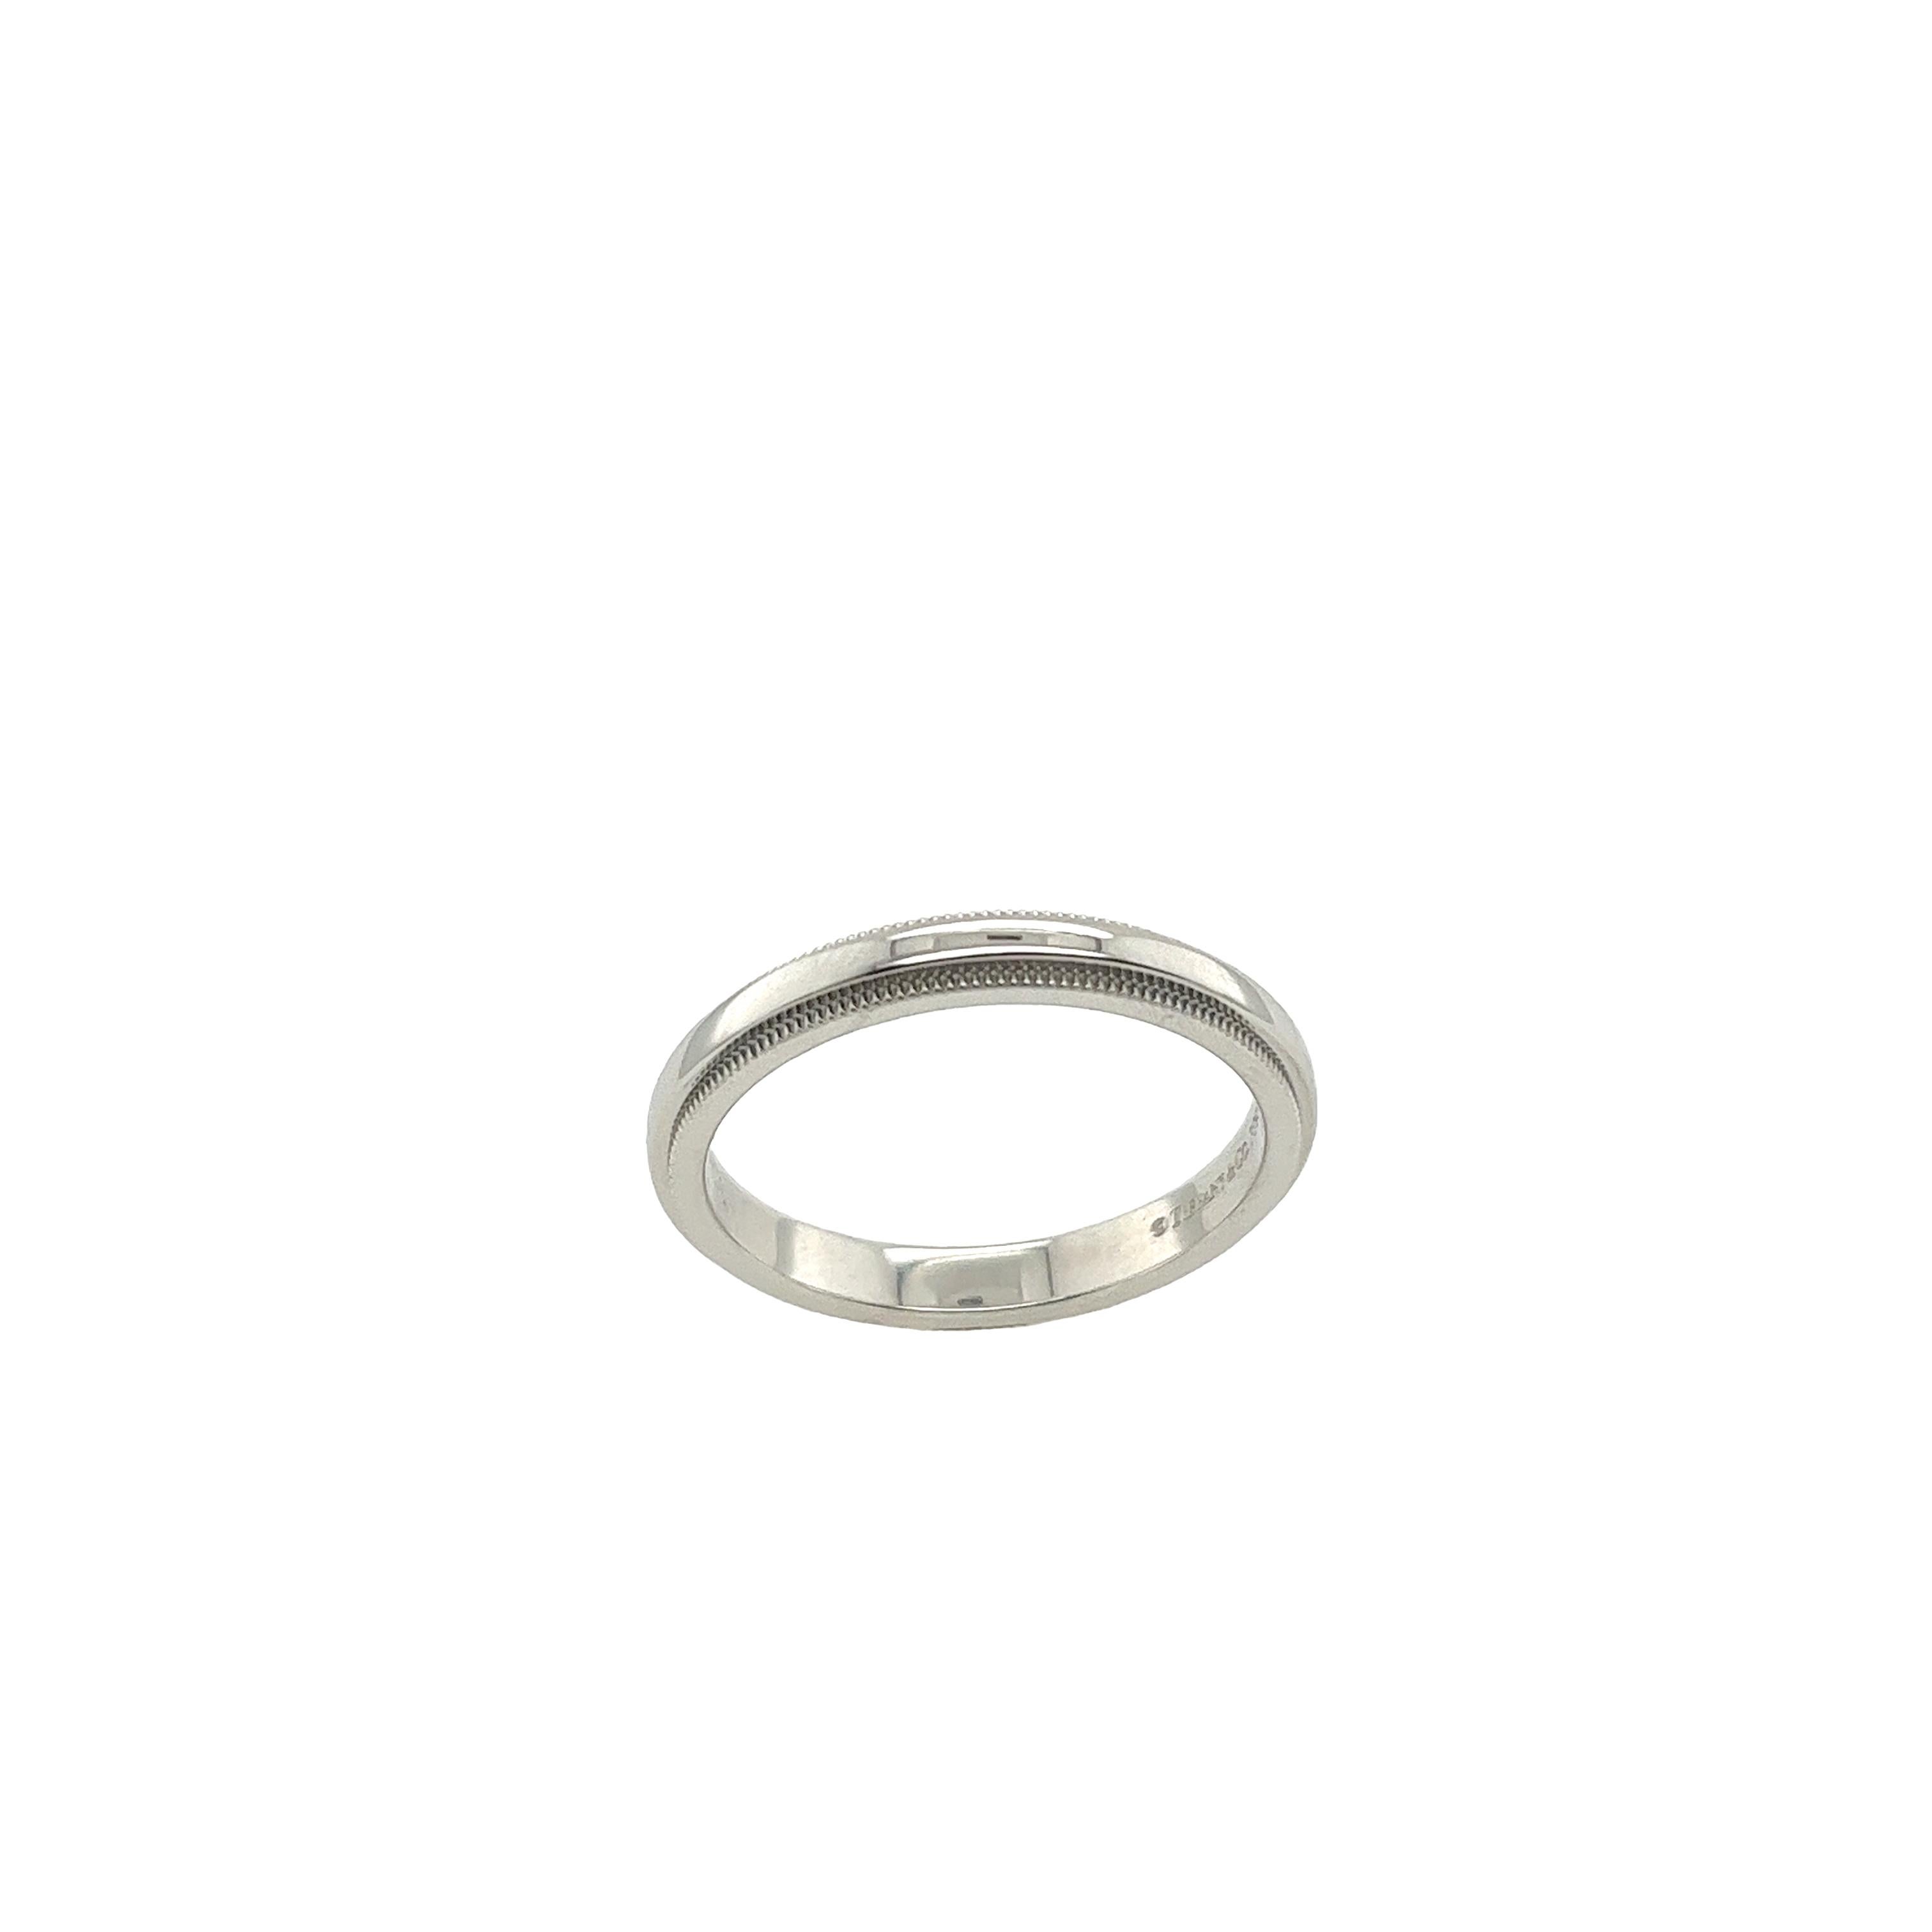 The Tiffany & Co. 3mm Together milgrain platinum wedding band is a stunning symbol of enduring love and commitment. Tiffany & Co. wedding bands are often crafted with a comfort fit design, ensuring maximum comfort for daily wear. The timeless design